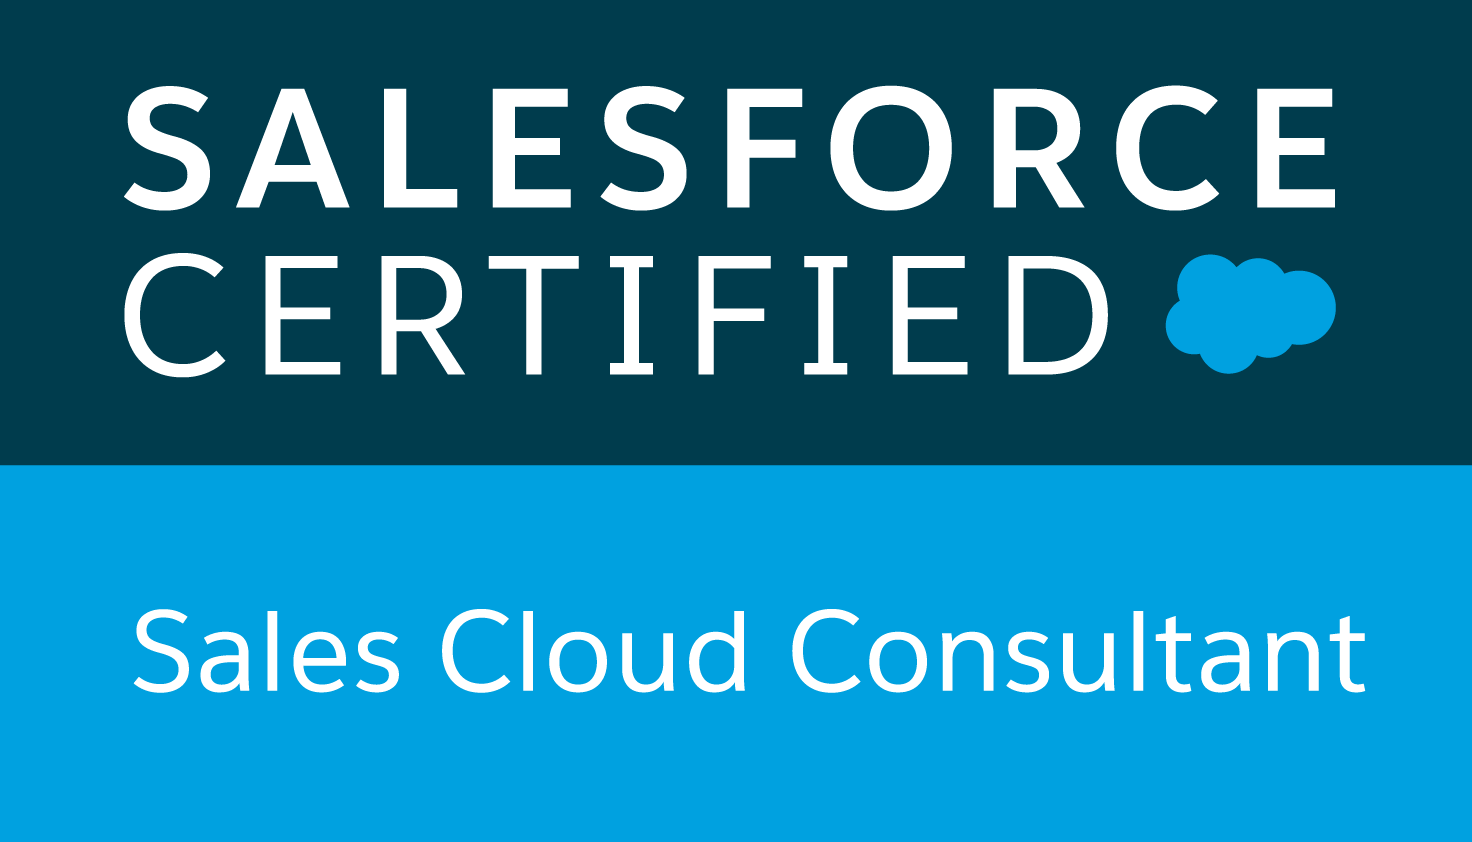 Salesforce Consulting Sales Cloud